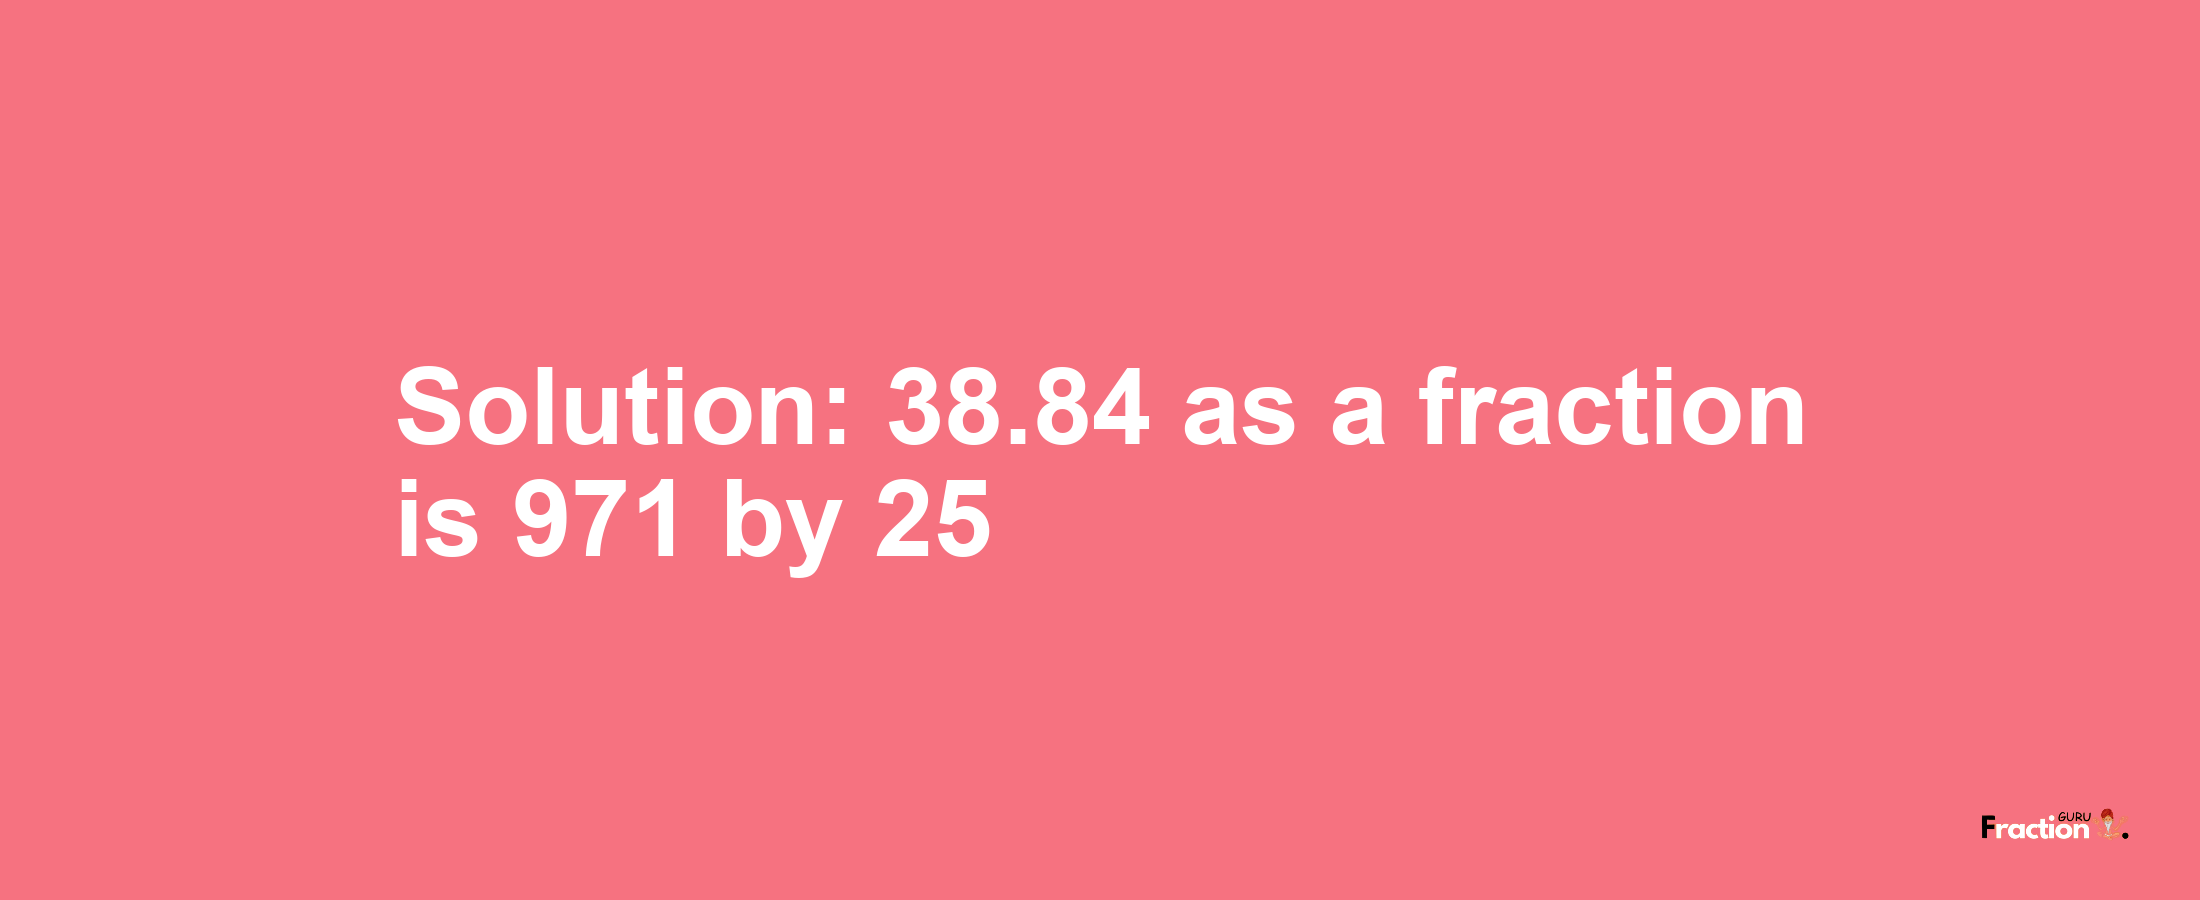 Solution:38.84 as a fraction is 971/25